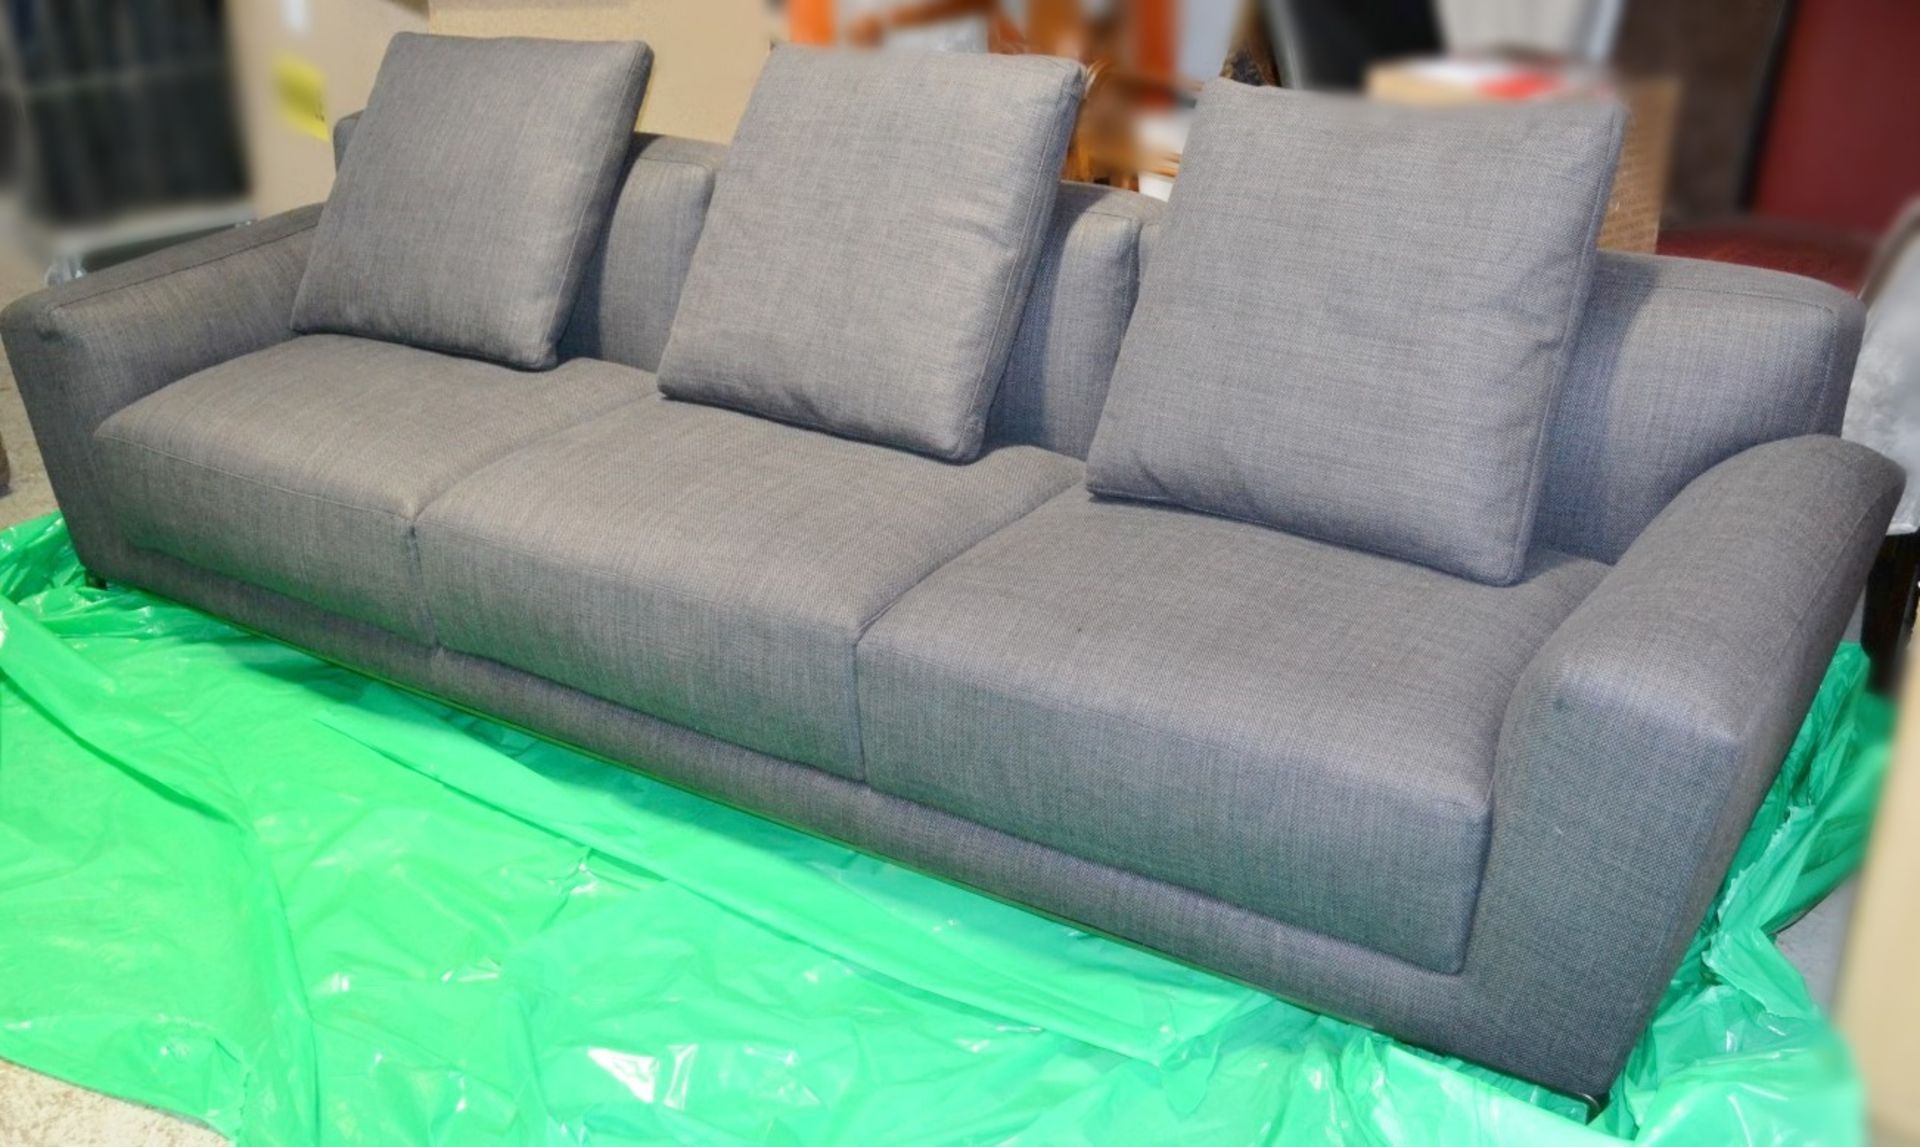 1 x Large B&B Italia "Luis" Sofa - 2.8 Metres Wide - Richly Upholstered In A Grey/Blue Fabric -